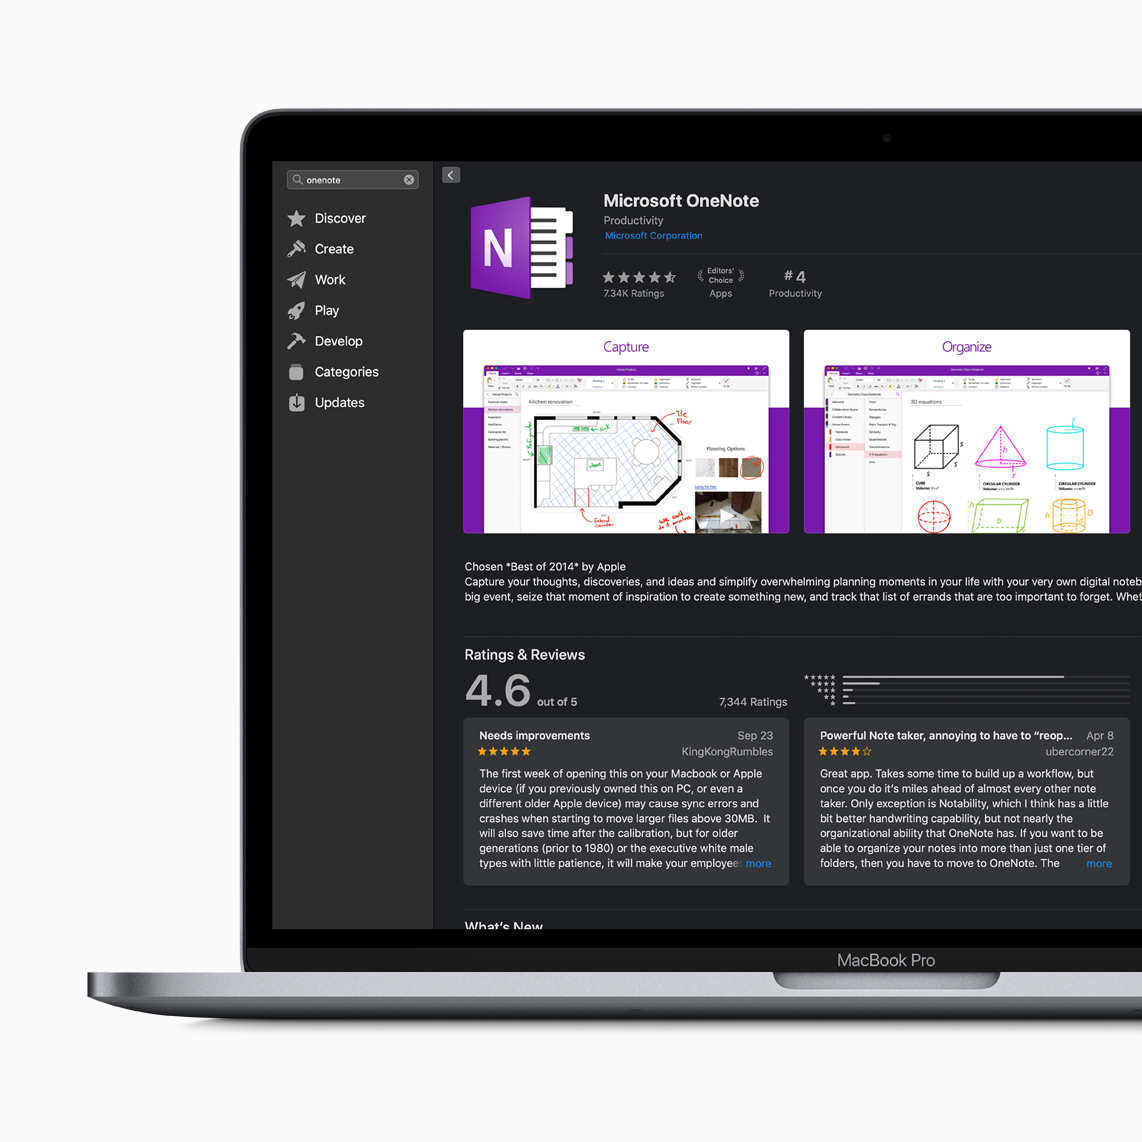 office 365 download for mac free